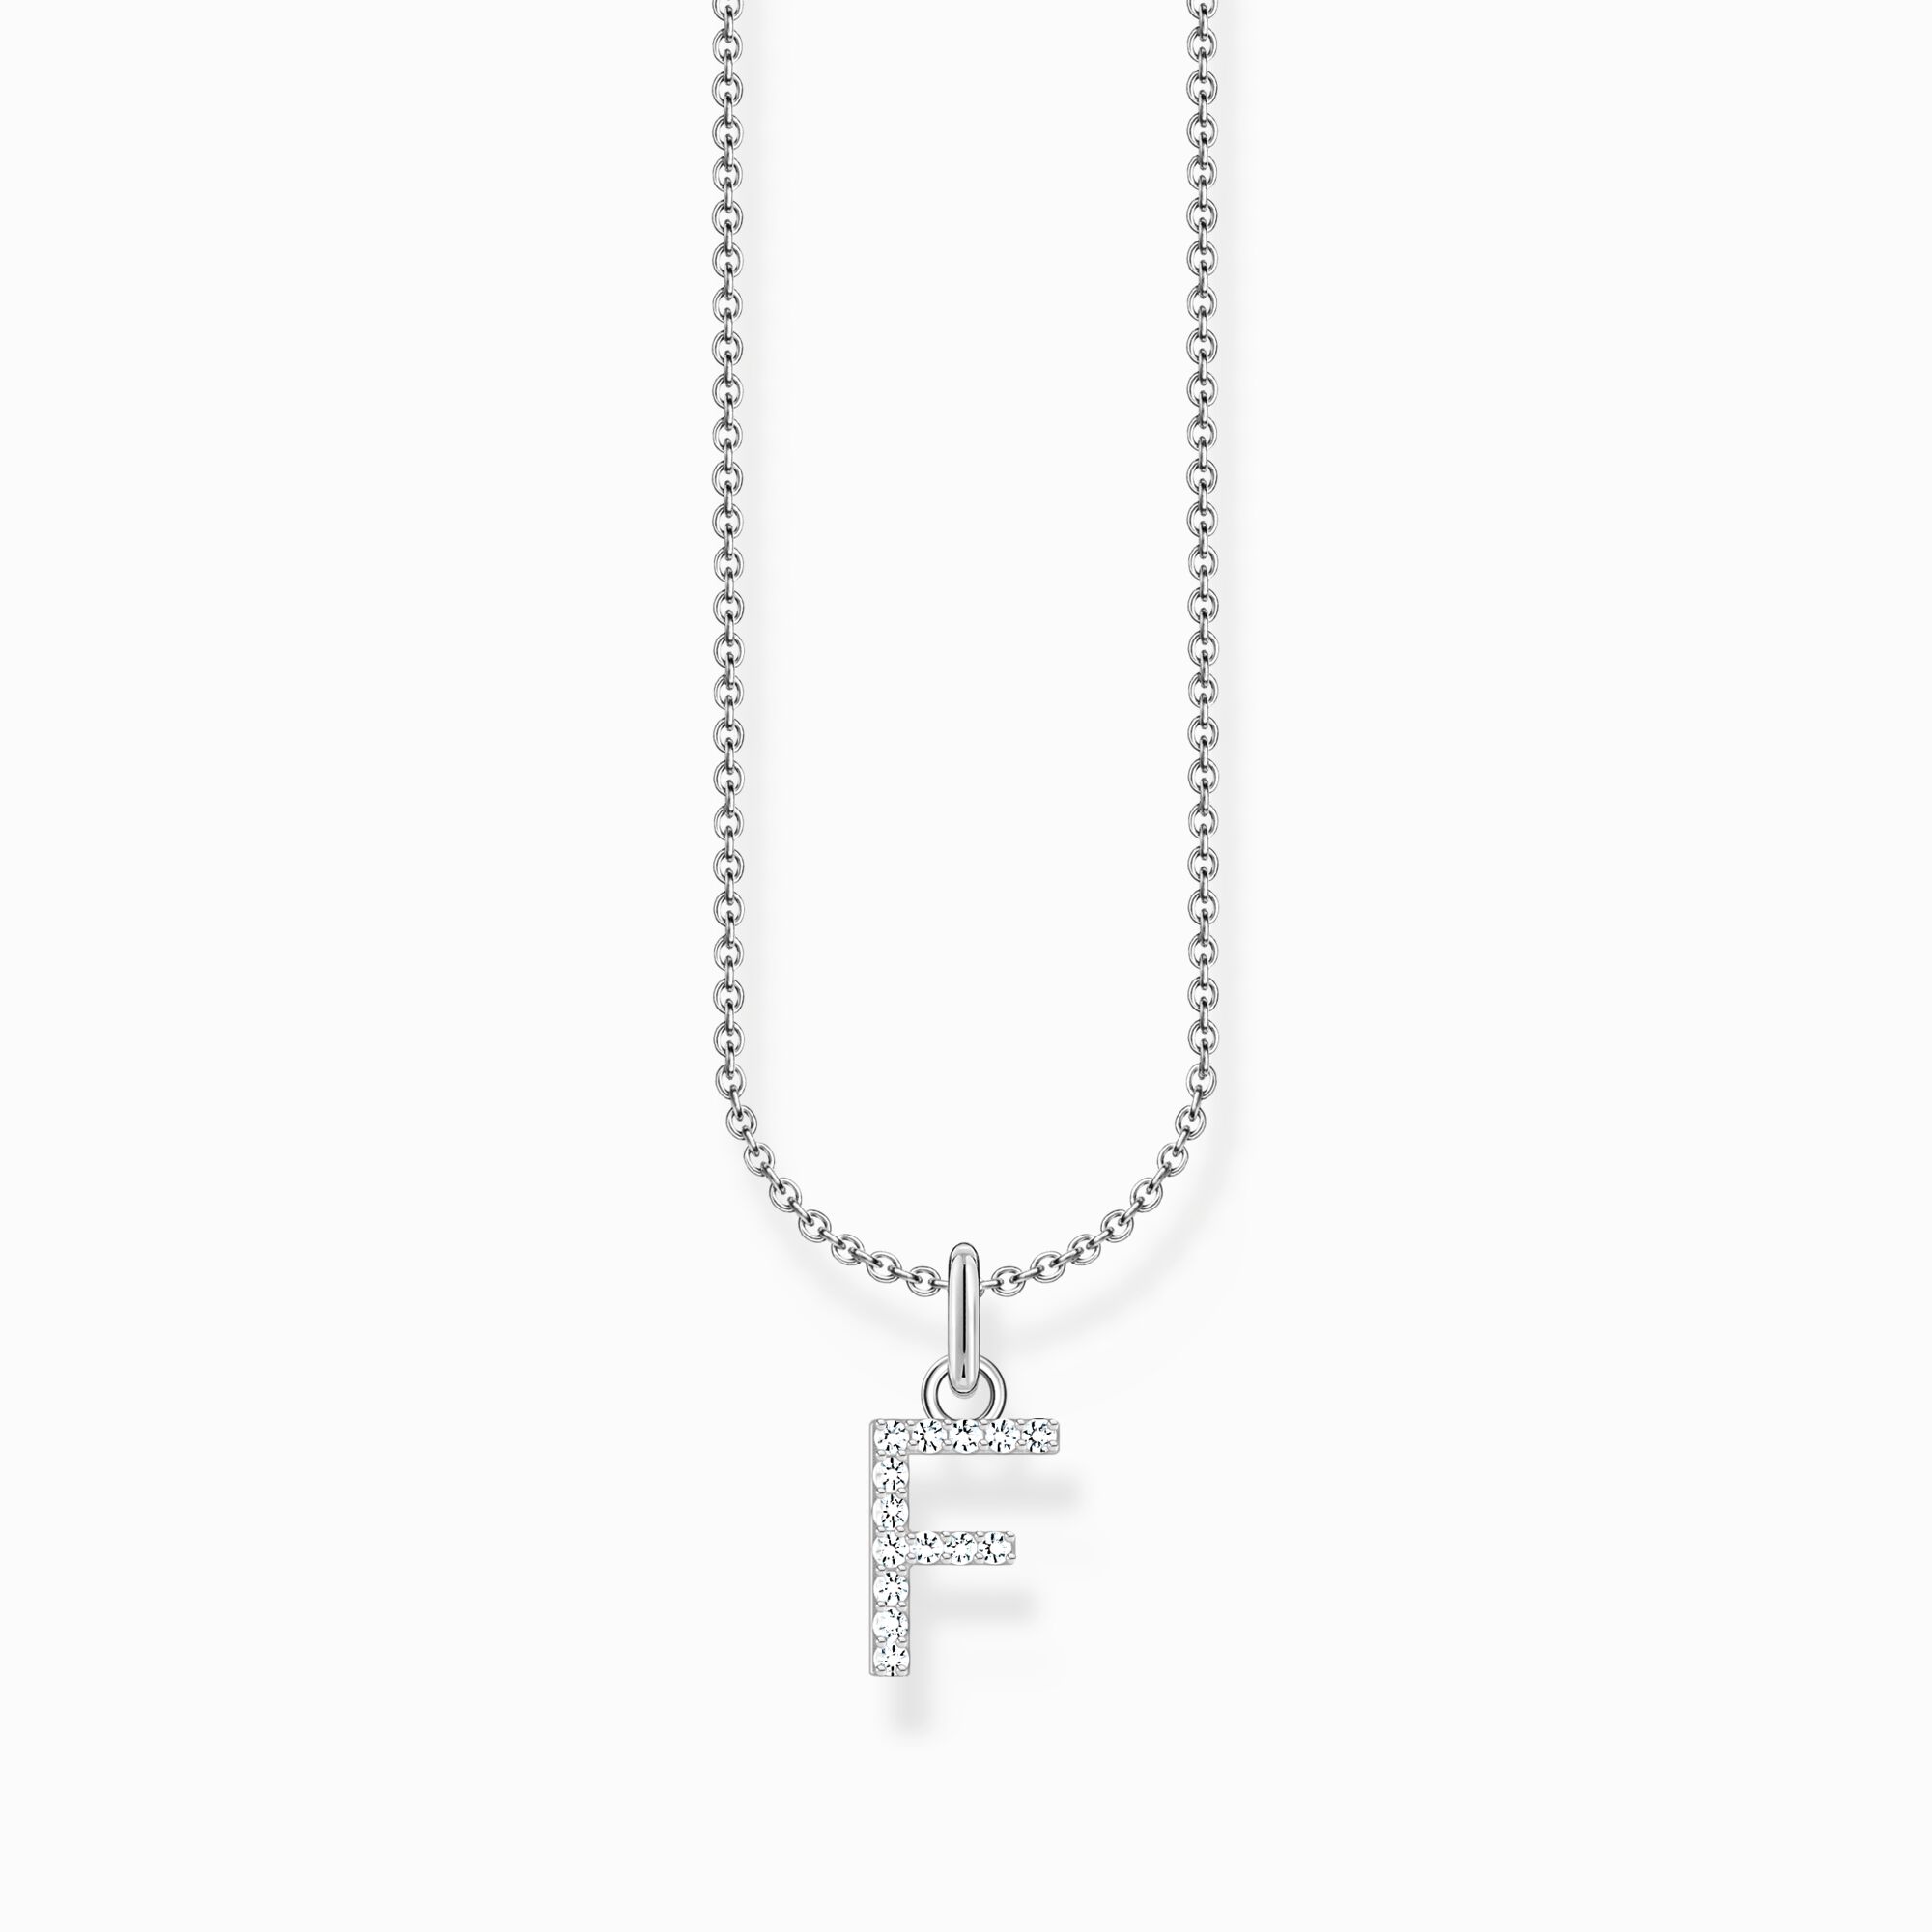 Silver necklace with letter pendant F and white zirconia from the Charming Collection collection in the THOMAS SABO online store